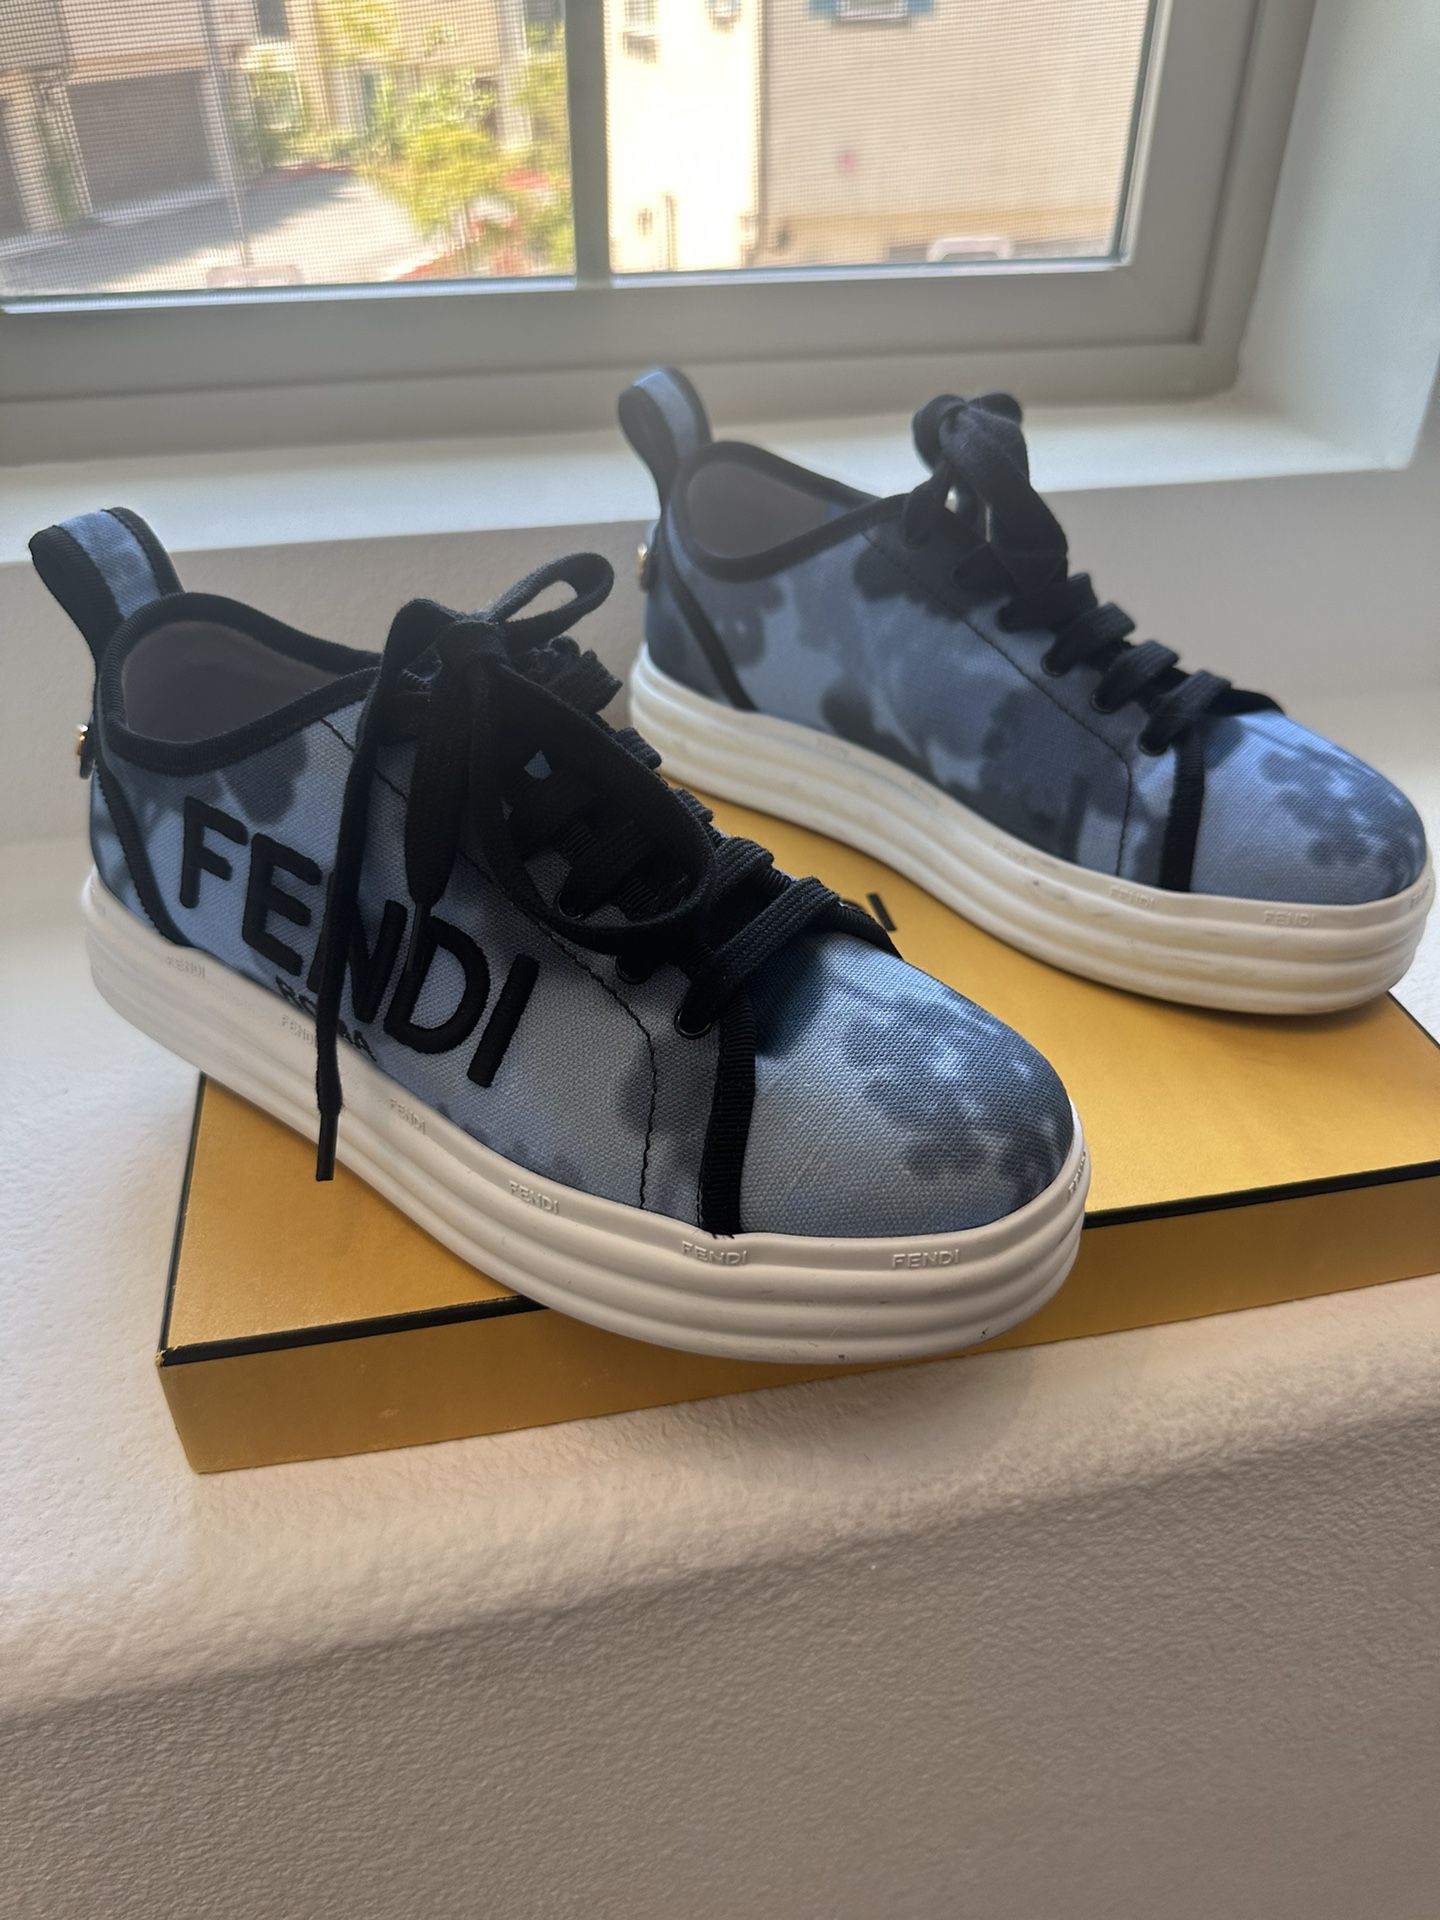 Authentic FENDI Size 7 Only $250 OBO 